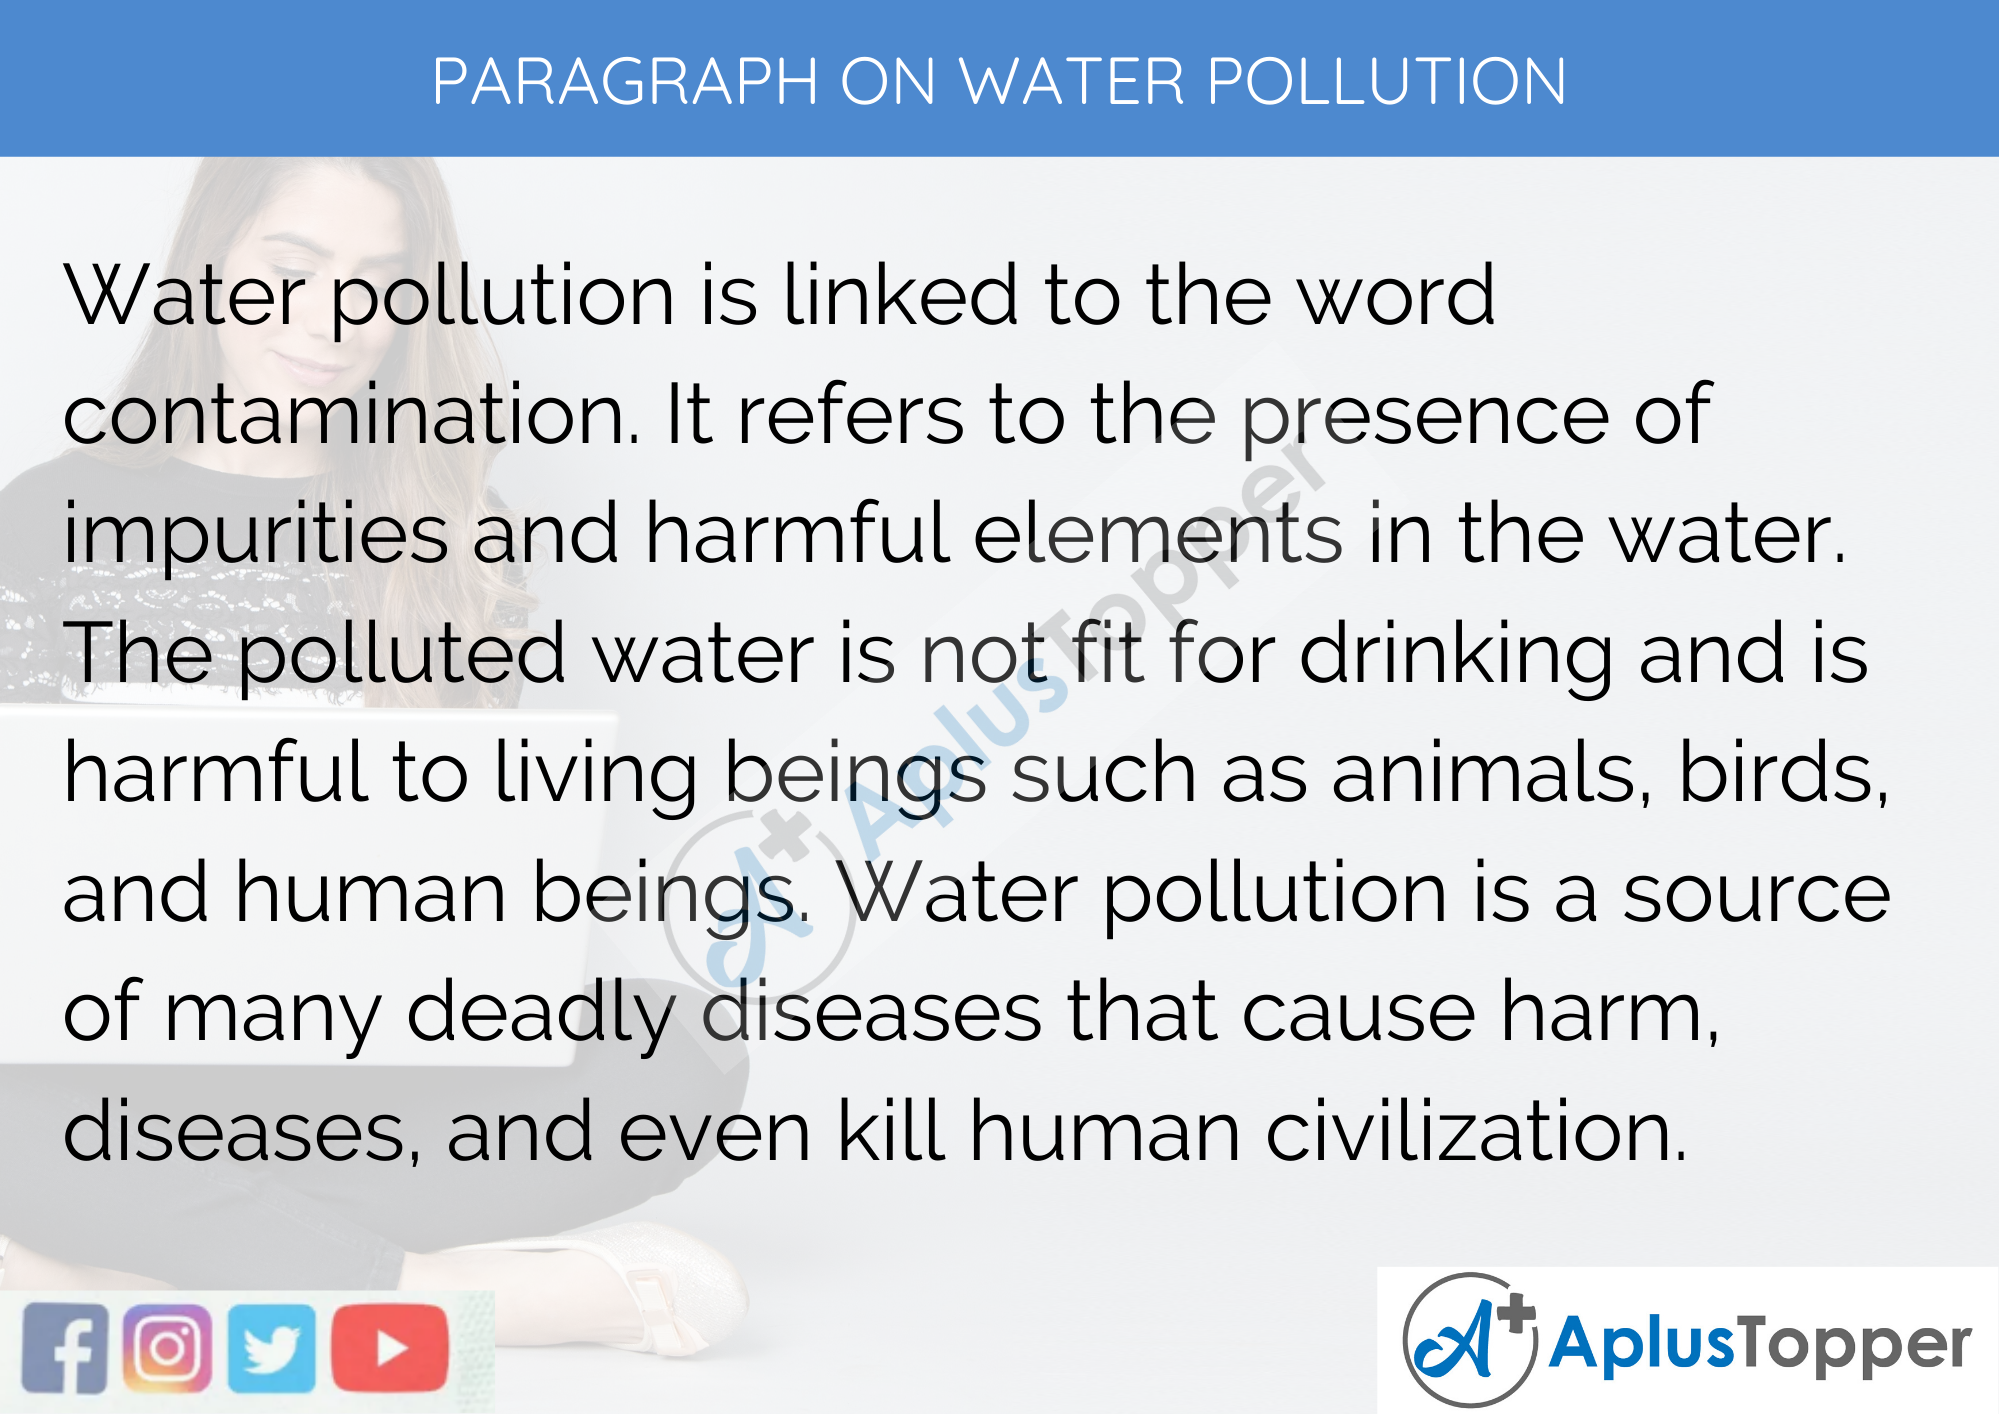 Paragraph on Water Pollution - 100 Words for Classes 1, 2, and 3 Kids